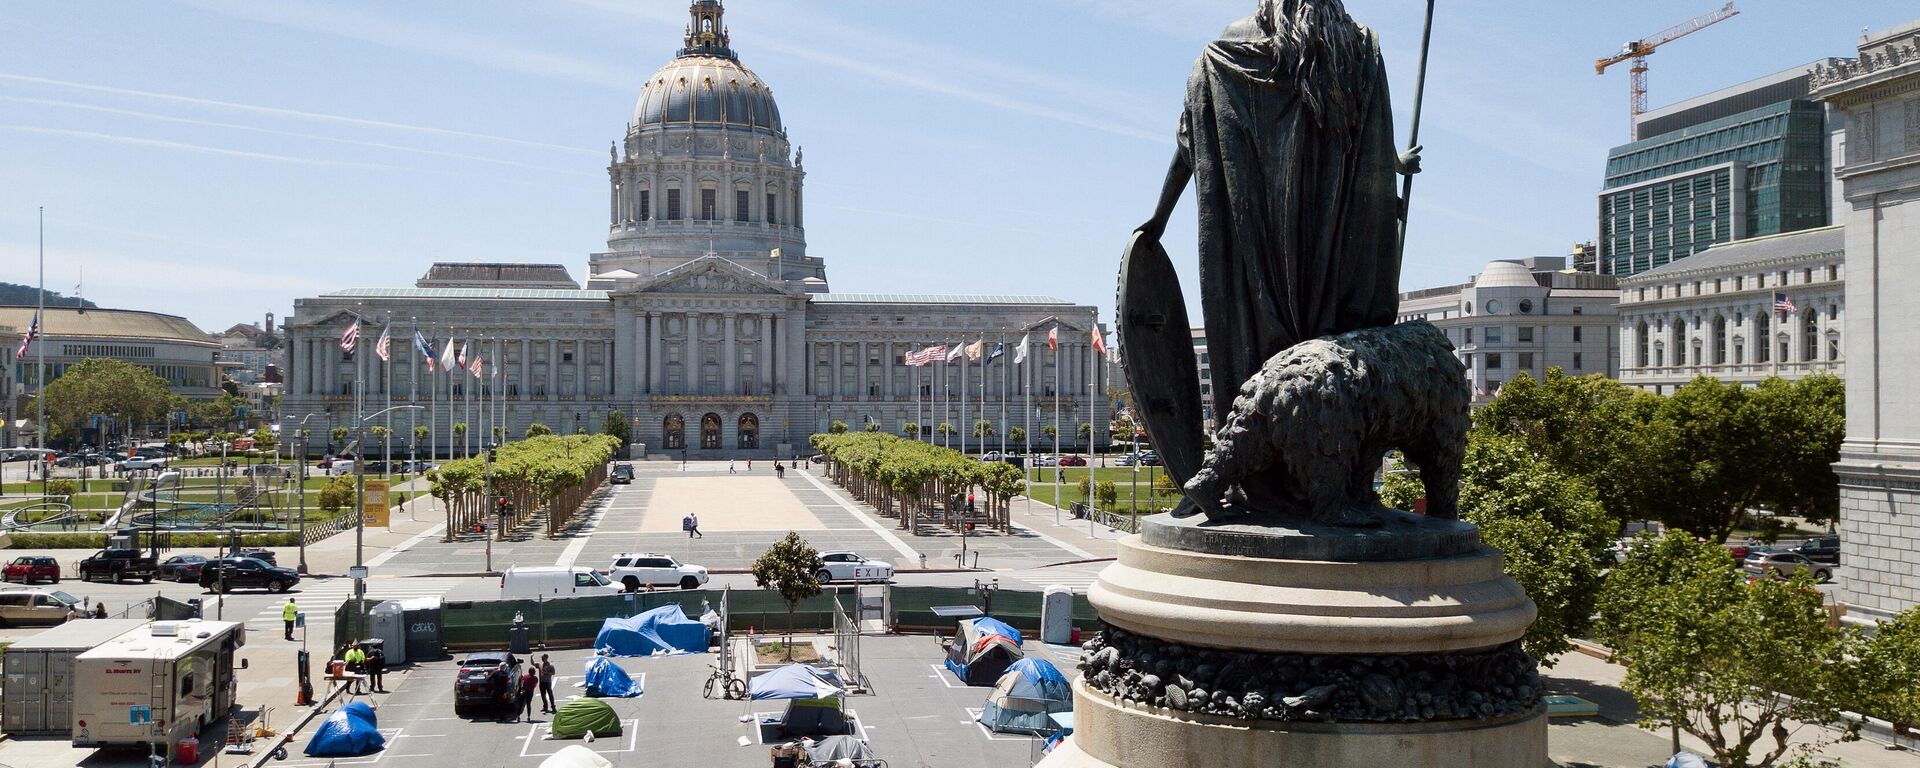 An aerial view shows a statue of Eureka, part of the Pioneer Monument, looking over squares painted on the ground to encourage homeless people to keep to social distancing at a city-sanctioned homeless encampment across from City Hall in San Francisco, California, on May 22, 2020, amid the novel coronavirus pandemic - Sputnik International, 1920, 01.04.2023